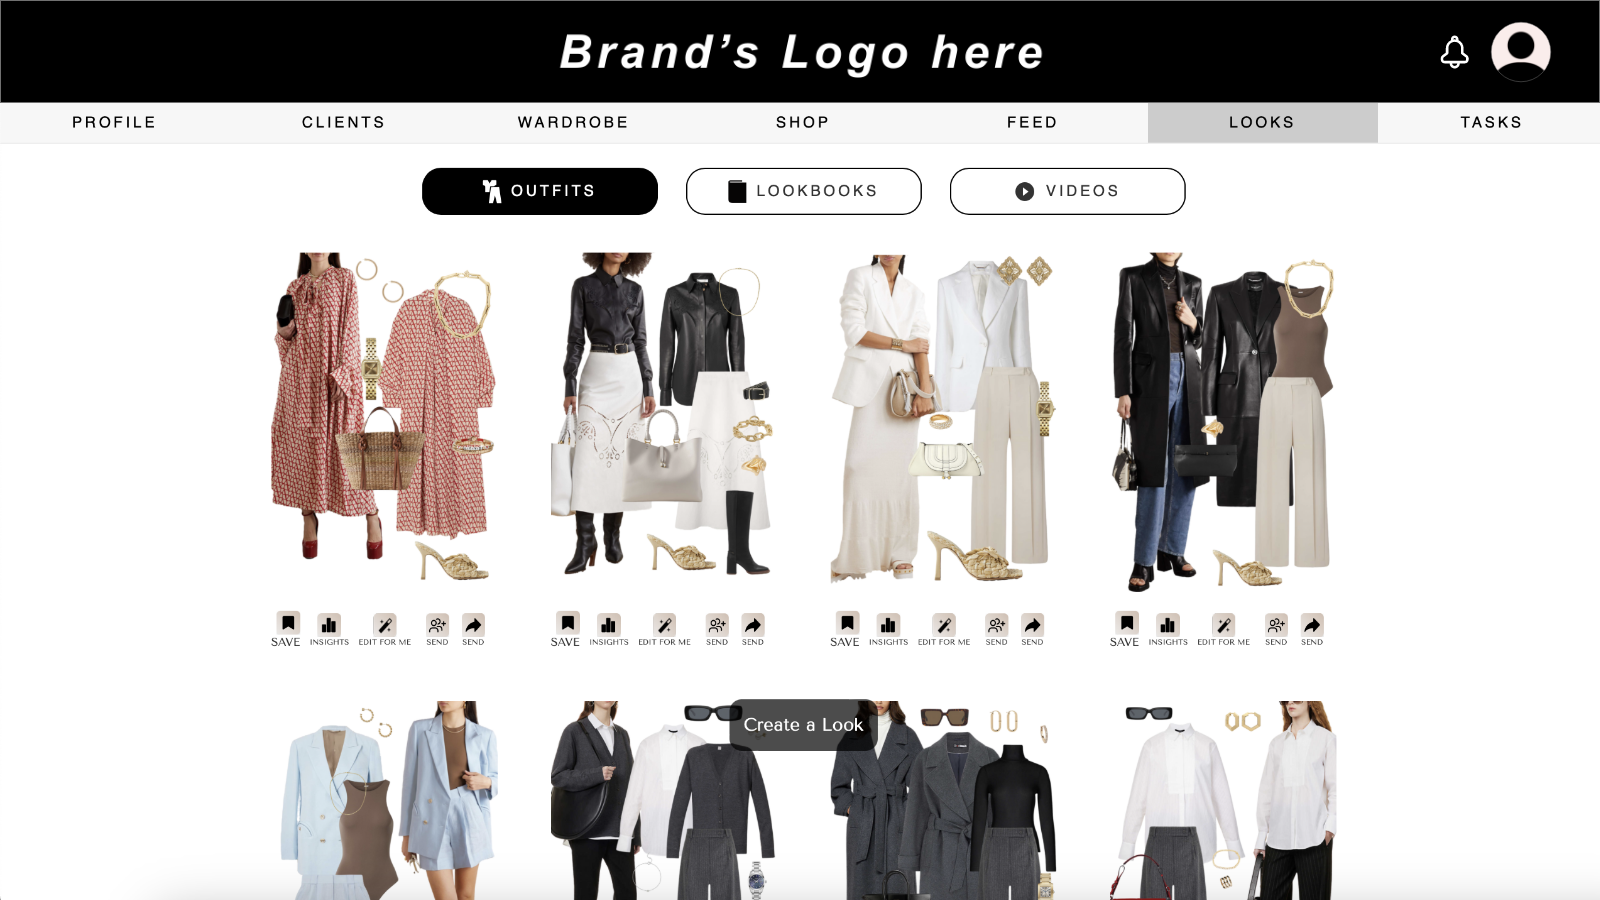 Drive sales & delight customers with personalised lookbooks